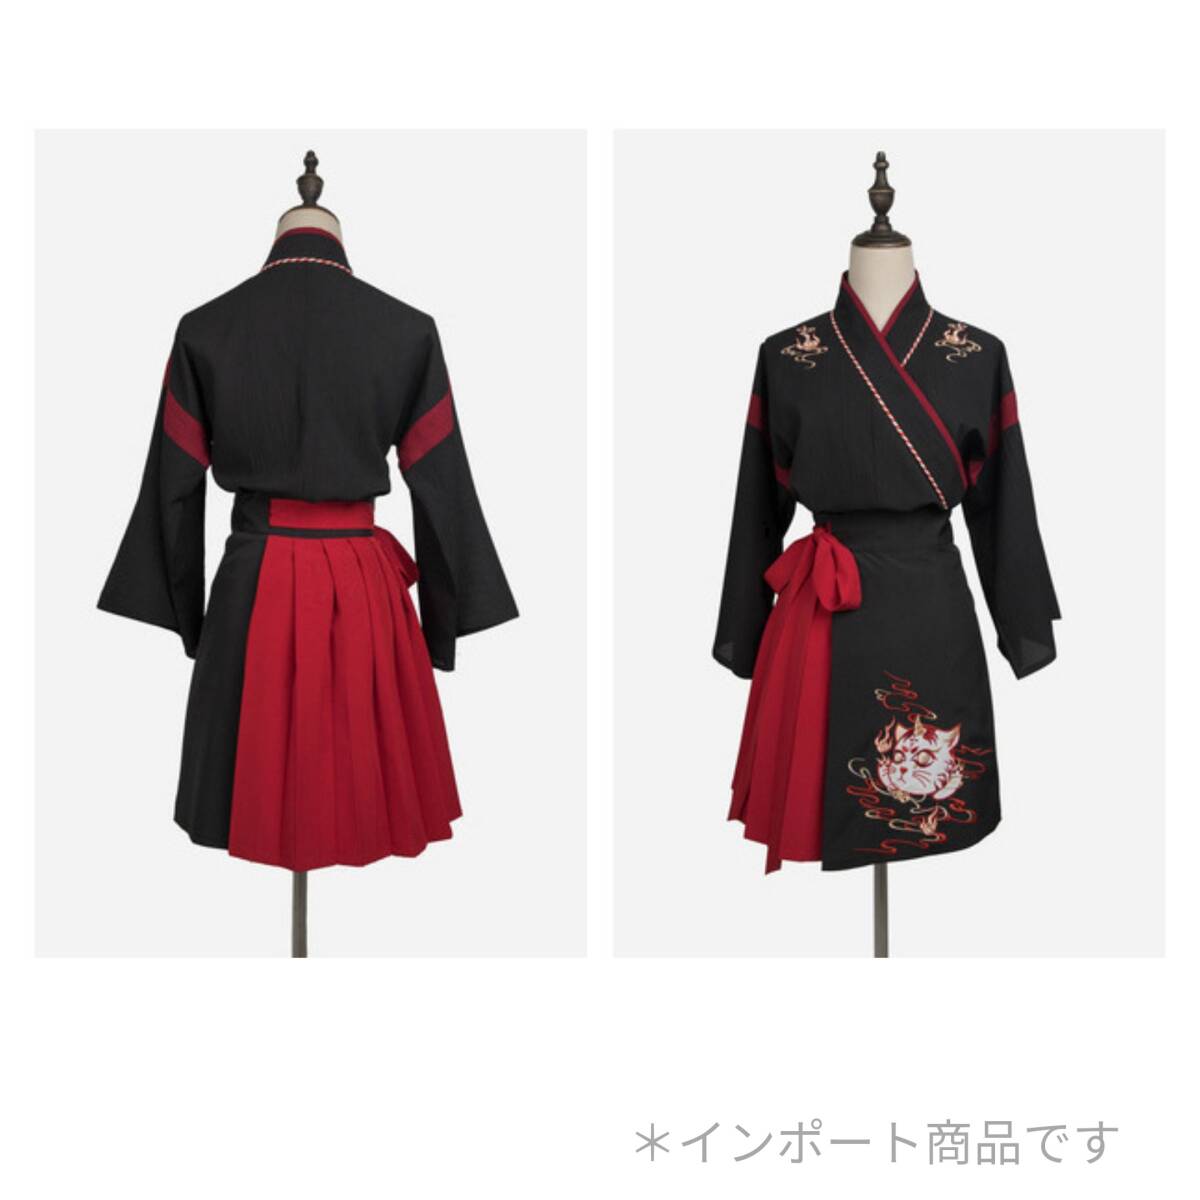 { new goods } costume play clothes [ Mini ska . woman ][M size ] Japanese clothes . clothes yukata cosplay put on clothes flower . skirt retro manner . woman lady's fancy dress C1064